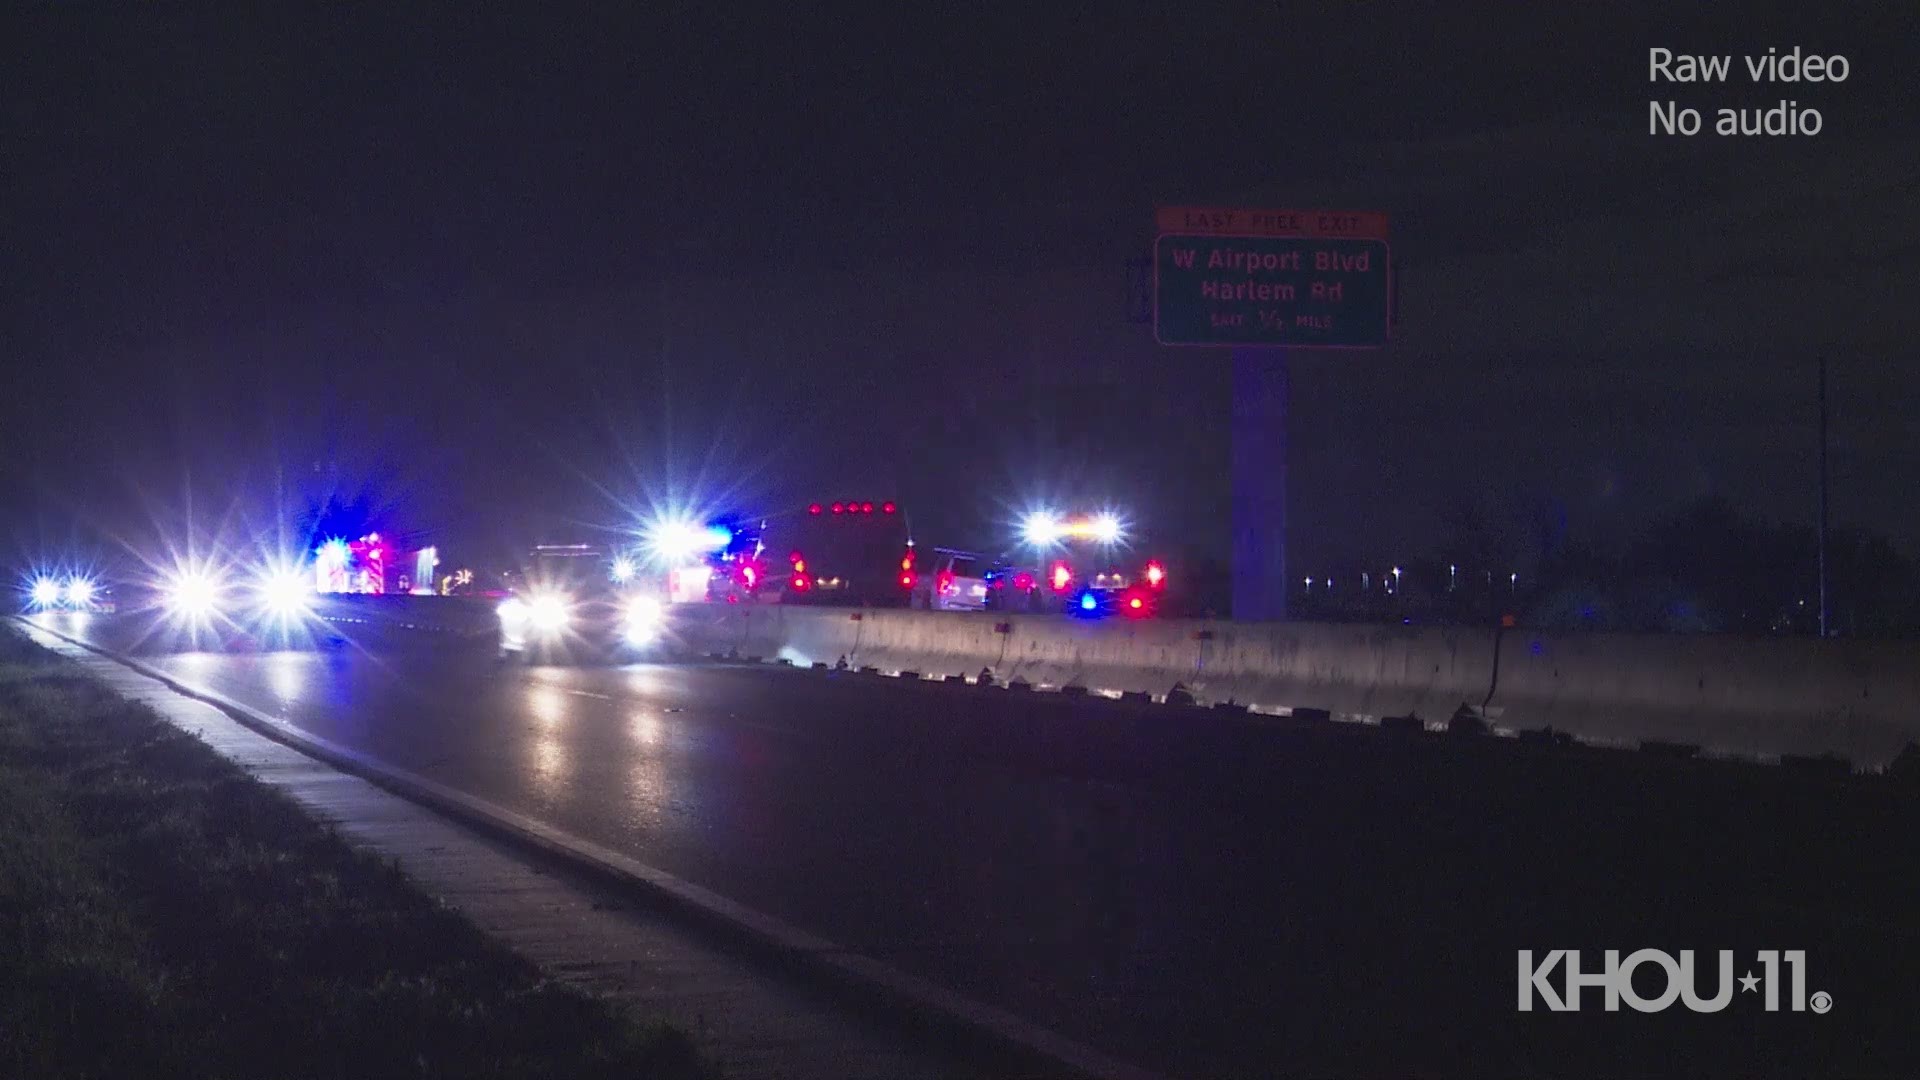 A person was killed in a single-vehicle crash near Richmond late Monday night, according to the Fort Bend County Sheriff’s office.